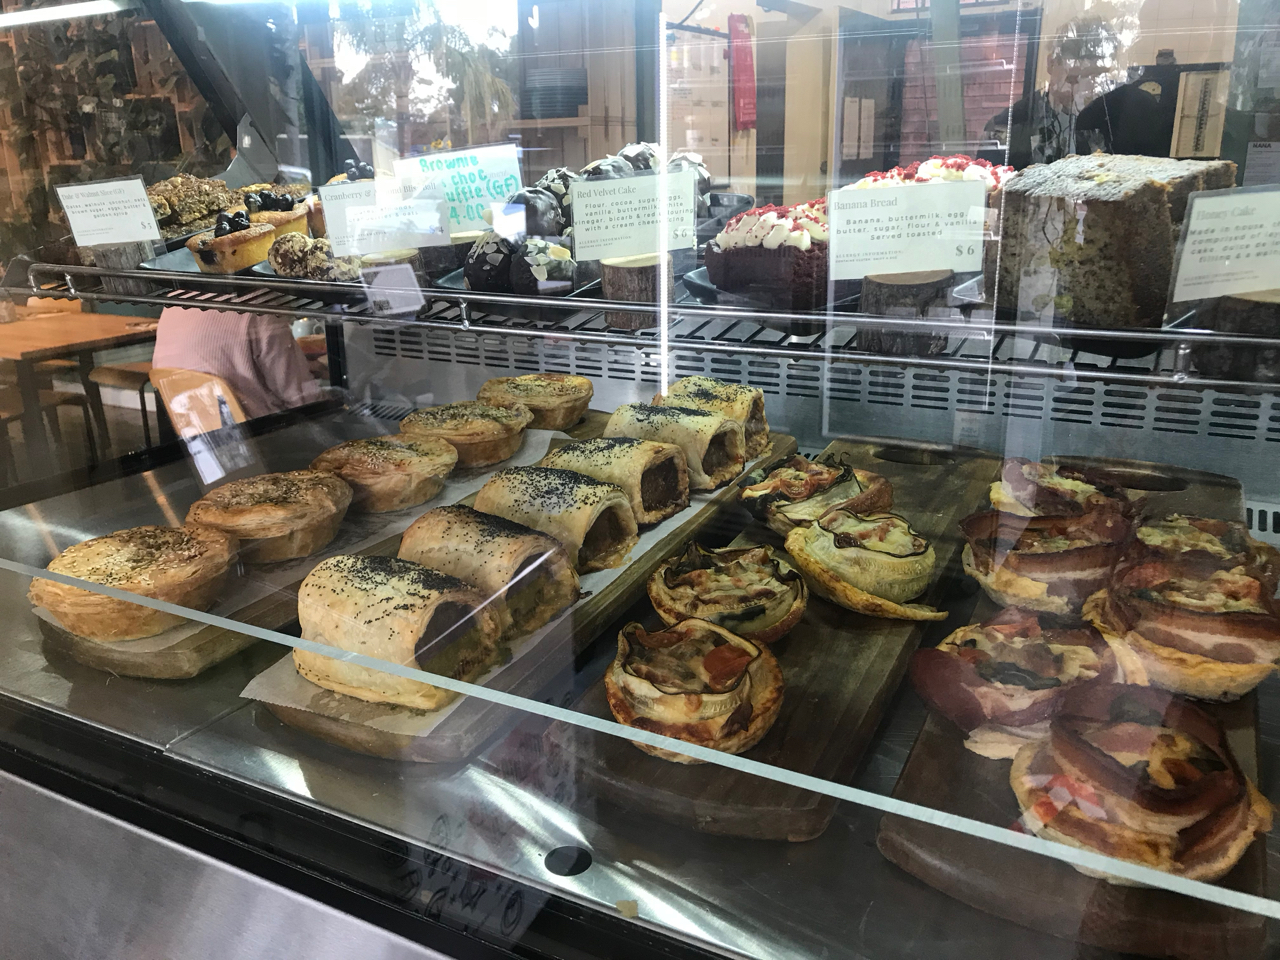 A cabinet filled with pies and sausage rolls